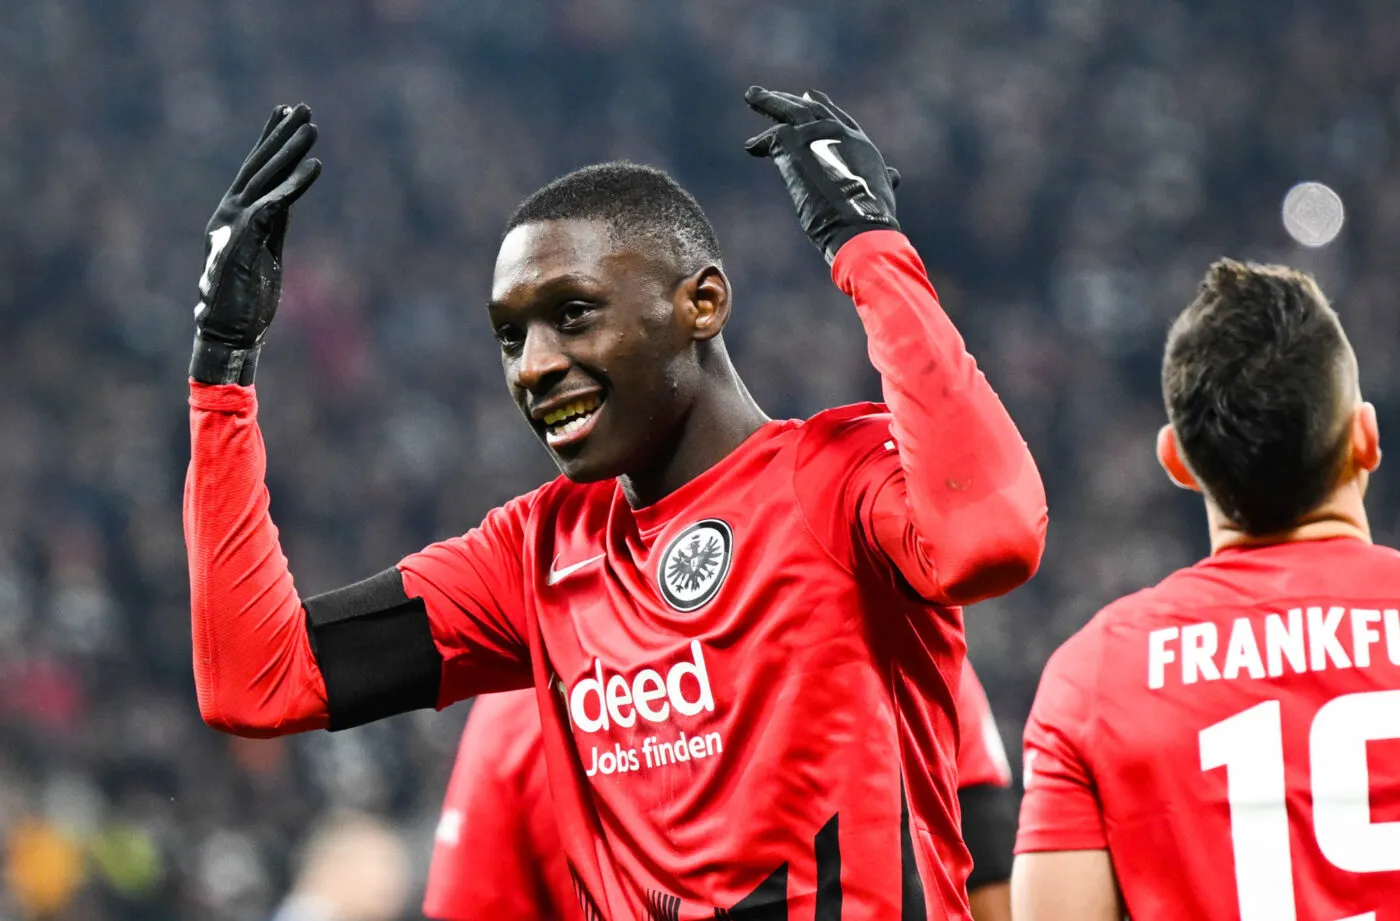 07 February 2023, Hesse, Frankfurt/M.: Soccer, DFB Cup, SG Eintracht Frankfurt - SV Darmstadt 98, Round of 16, Deutsche Bank Park. Frankfurt's Randal Kolo Muani celebrates his goal to make it 1:0. IMPORTANT NOTE: In accordance with the regulations of the DFL Deutsche Fußball Liga and the DFB Deutscher Fußball-Bund, it is prohibited to use or have used photographs taken in the stadium and/or of the match in the form of sequence pictures and/or video-like photo series. Photo: Arne Dedert/dpa - Photo by Icon sport